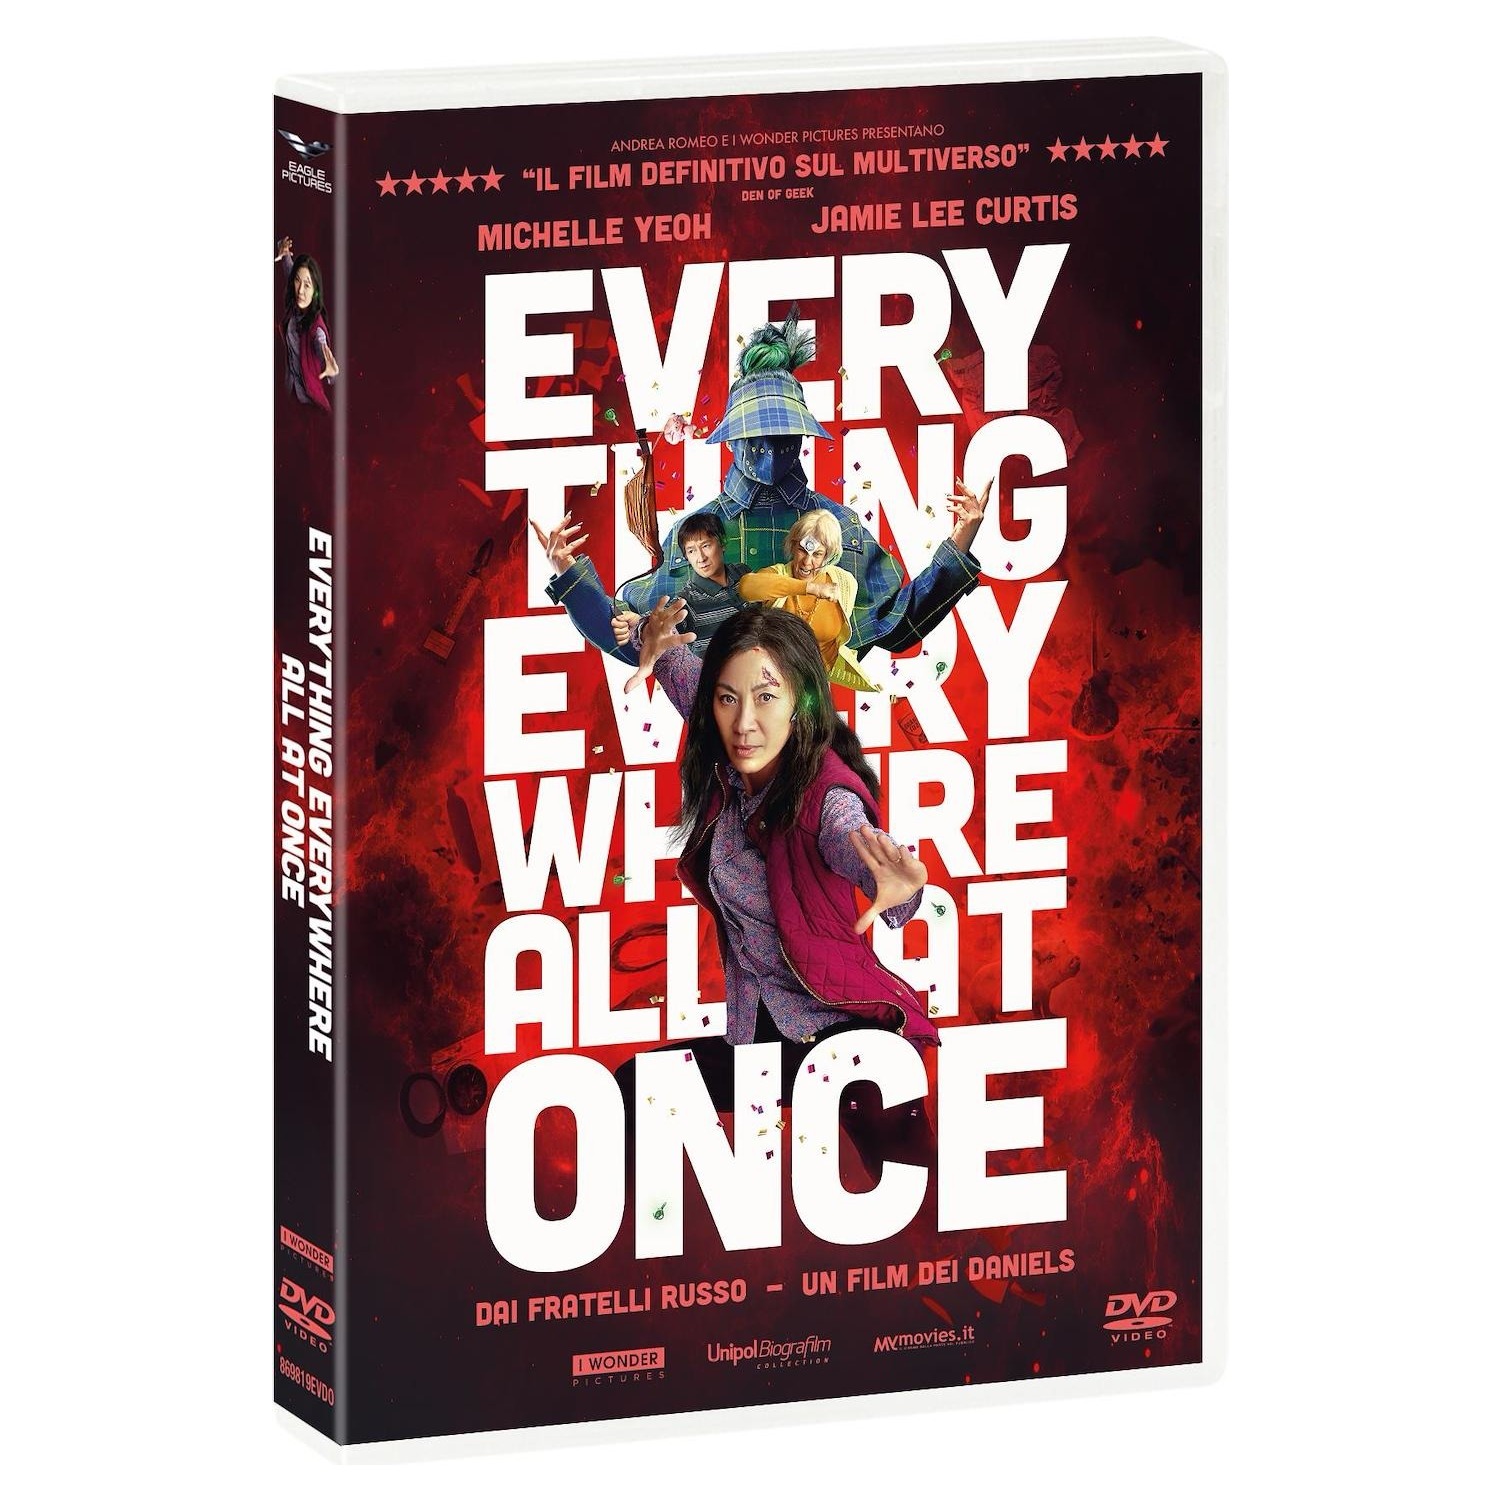 Immagine per DVD Everything Everywhere all at once da DIMOStore